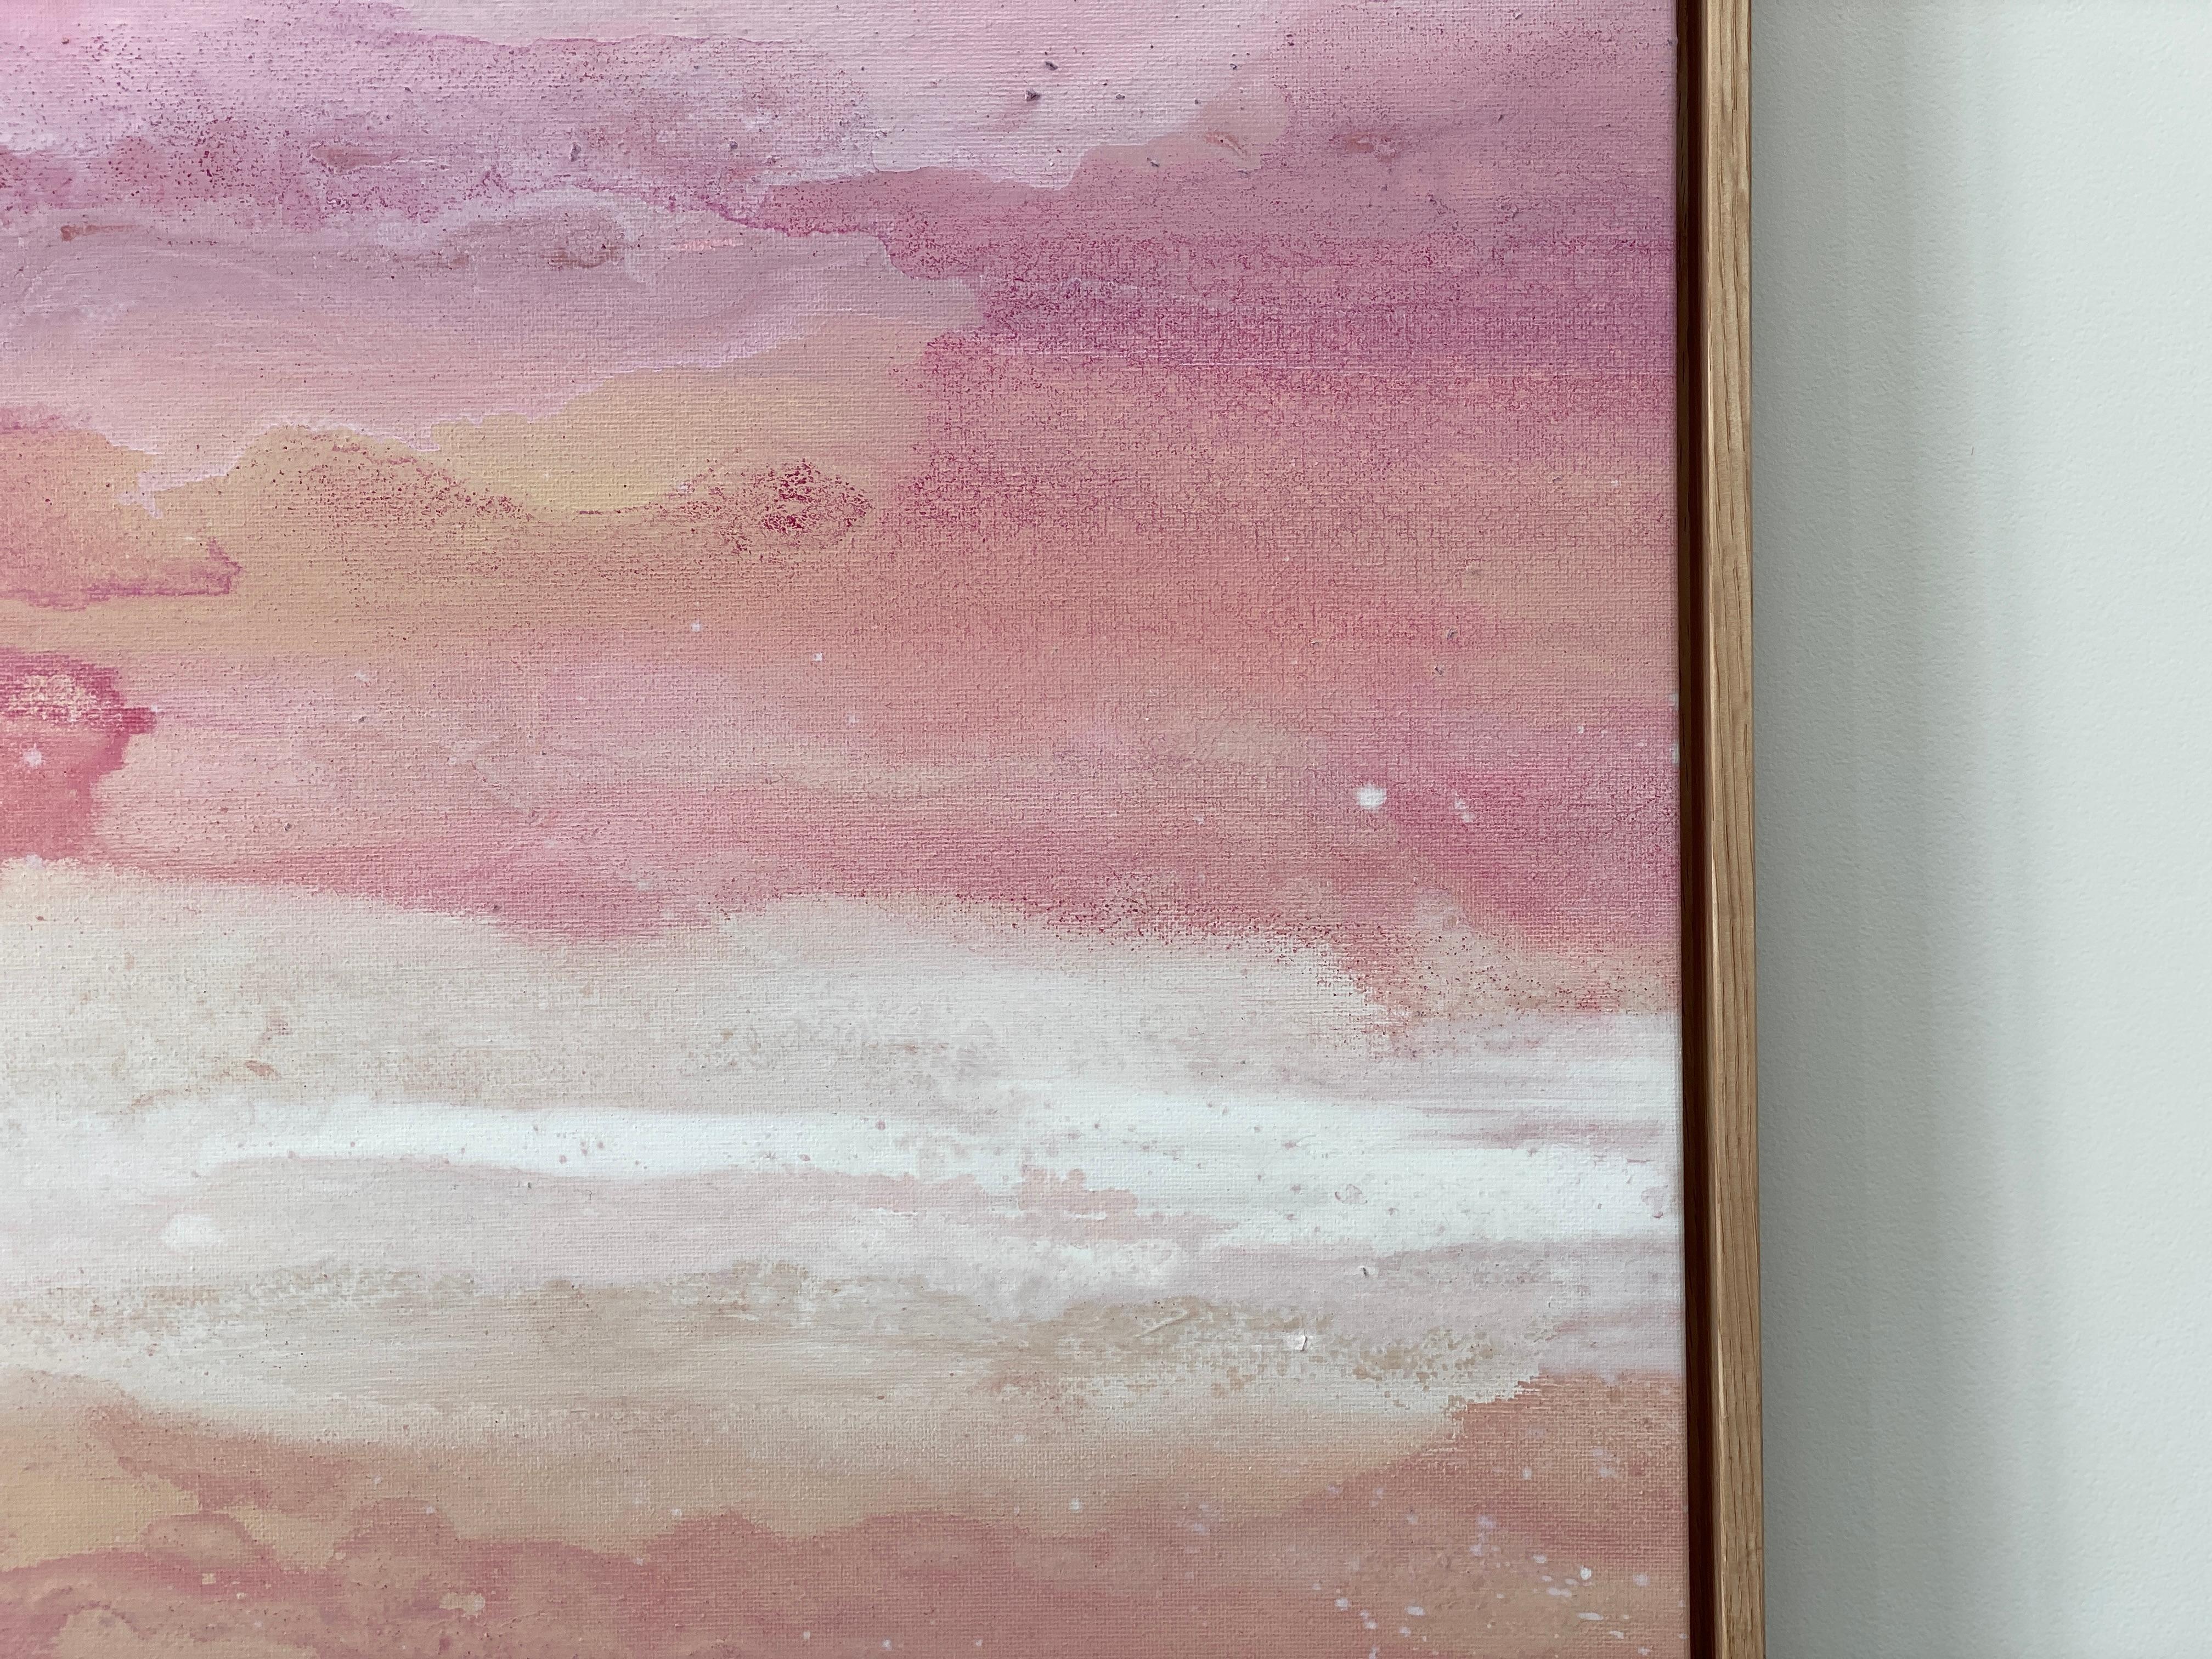 'Pink Coral'

A delicate, soft abstract expressionist painting in vibrant pinks, coral, white and earthy tones. Like visions of pink tidal waters at sunset or cloudy pinky afternoon skies you will feel the radiating calm, mediative energy. Painterly